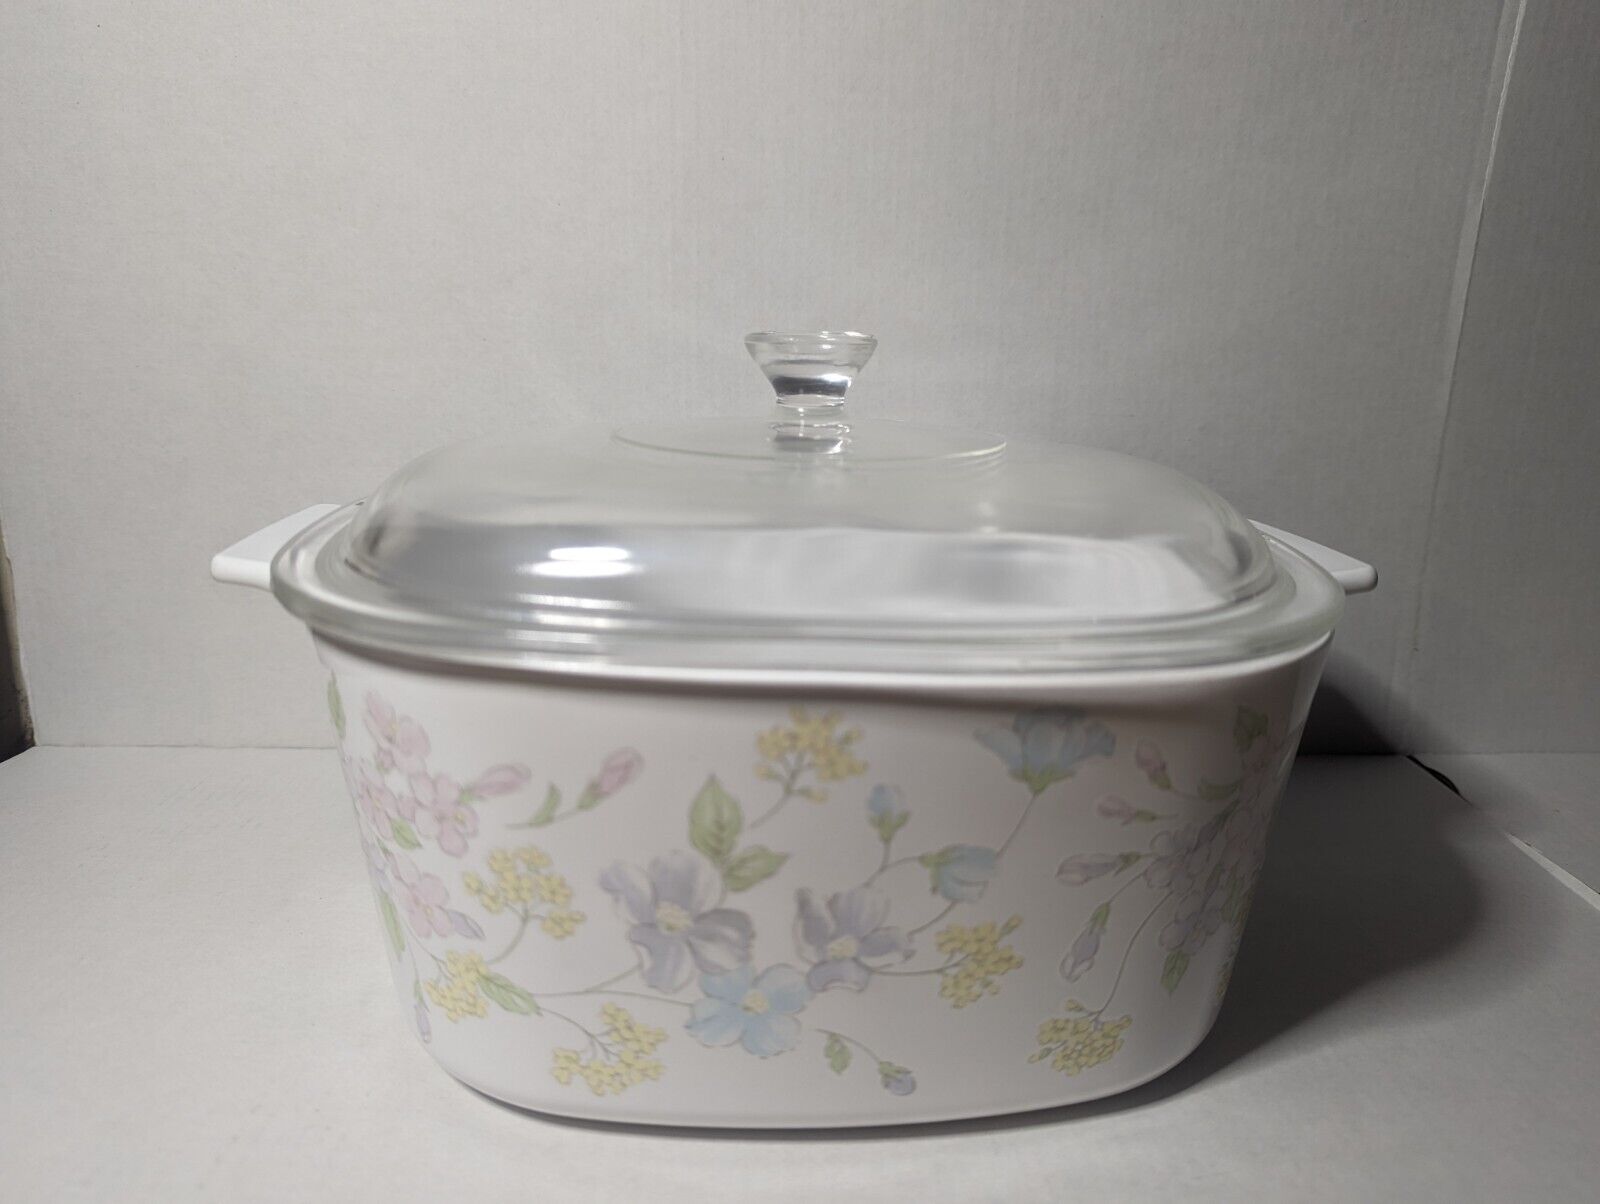 Corning Ware 3 Liter Casserole Dish With Lid Excellent Condition Cookware